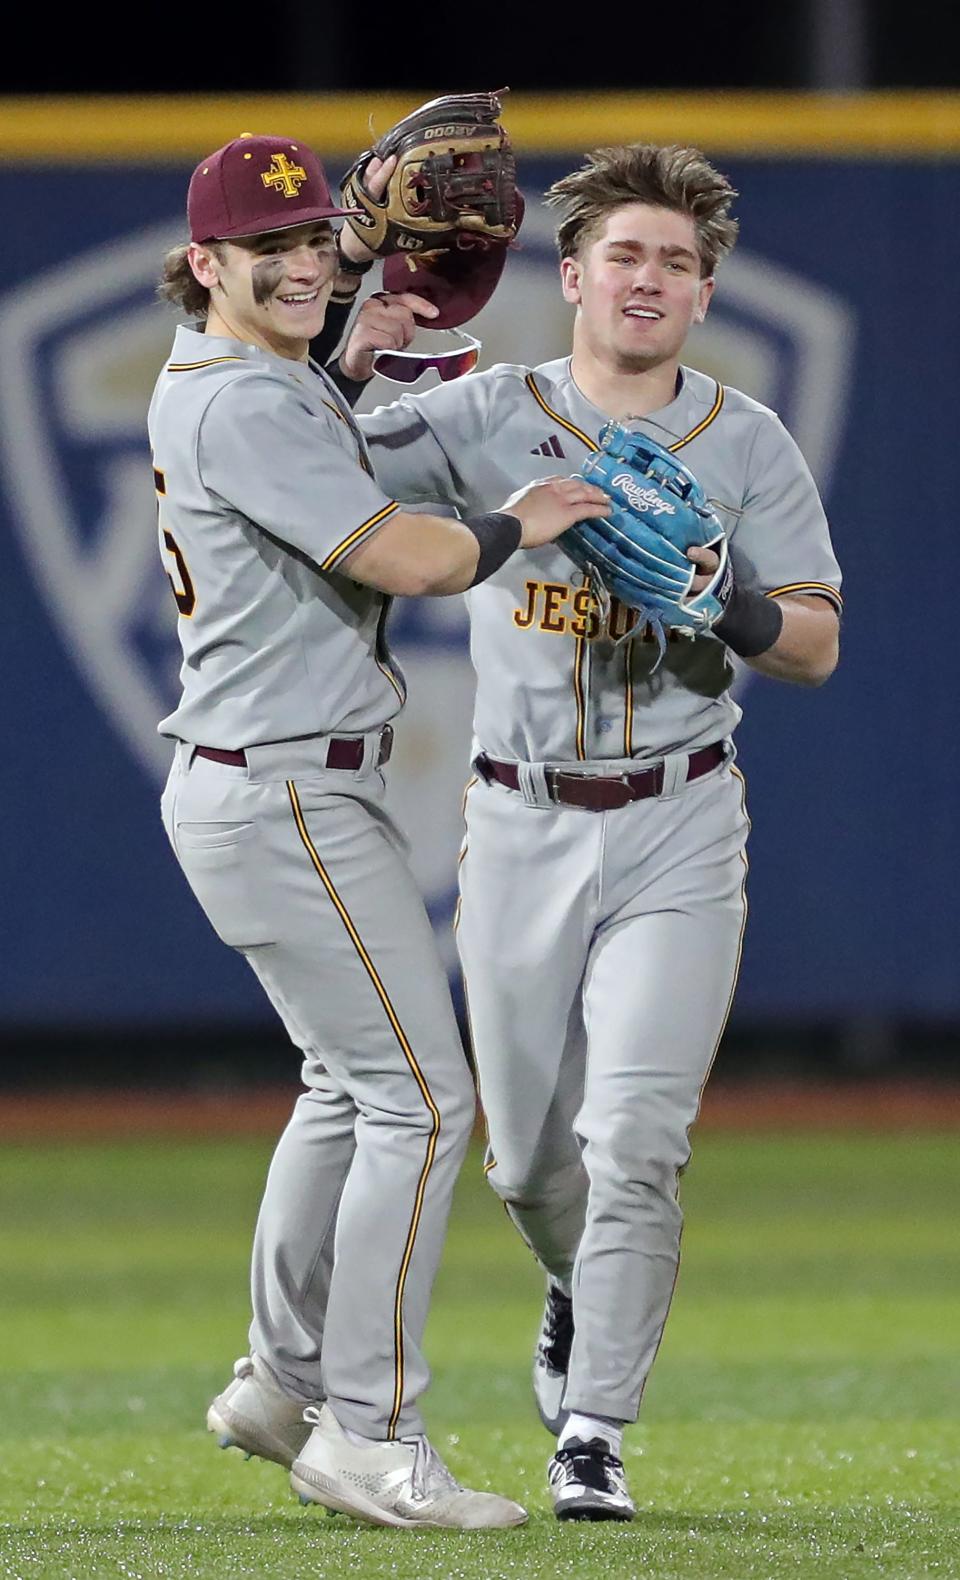 Walsh Jesuit shortstop Joey Canzoni, left, celebrates with left fielder Justin Bremner after he caught the final out of the fourth inning during a game at Kent State University's Schoonover Stadium on April 6.